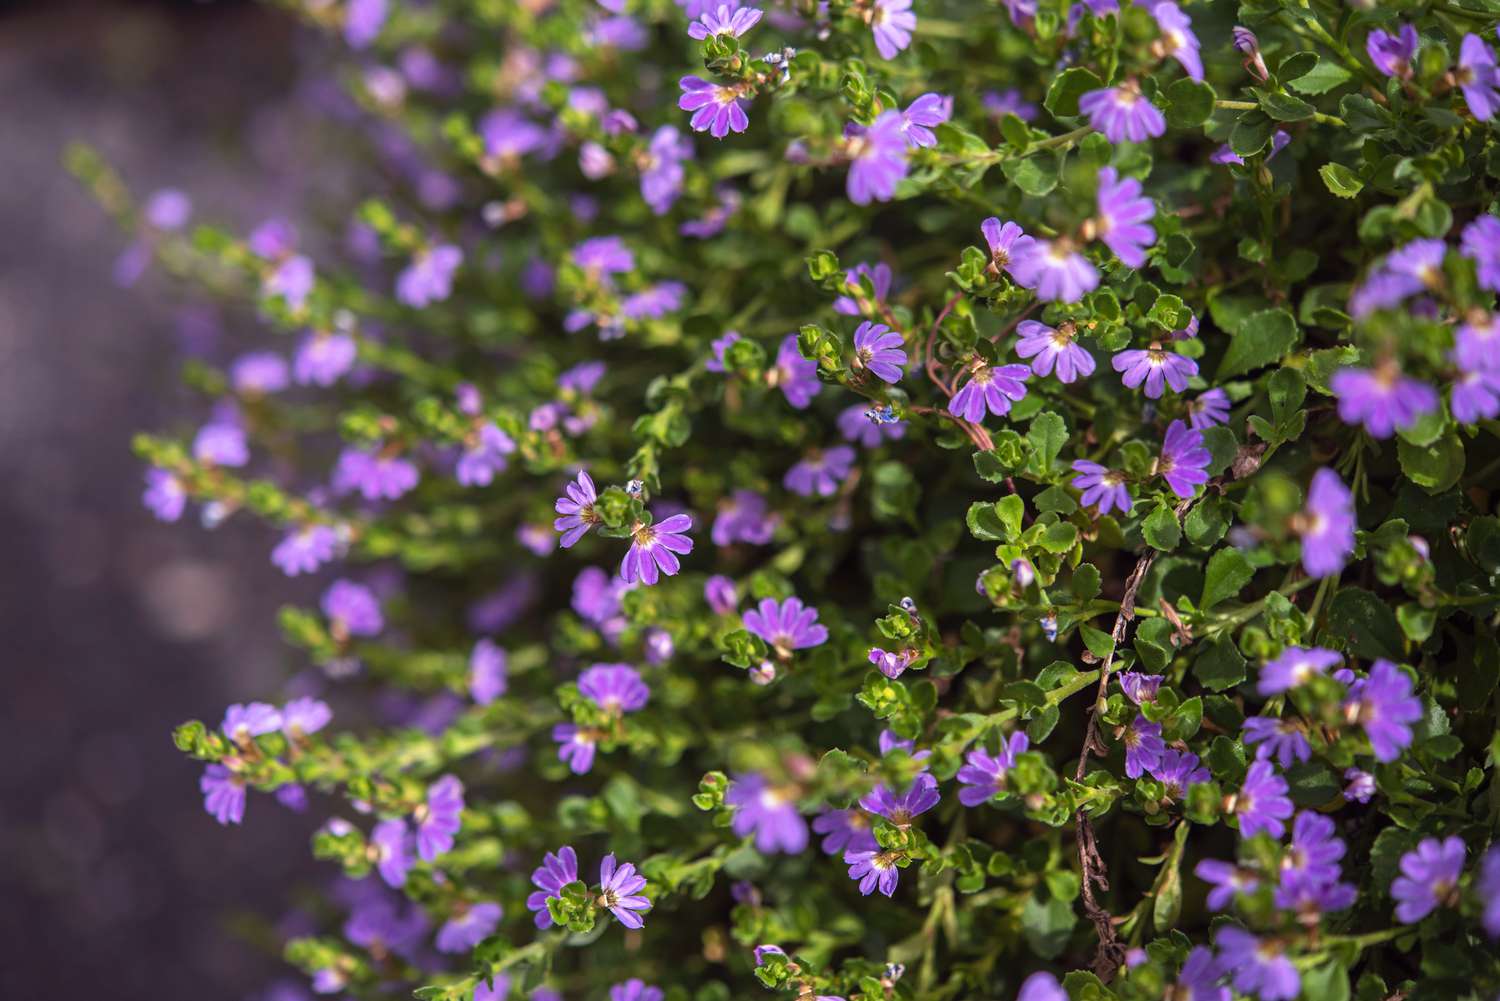 Scaevola plant with small purple flowers on thin green leaves closeup